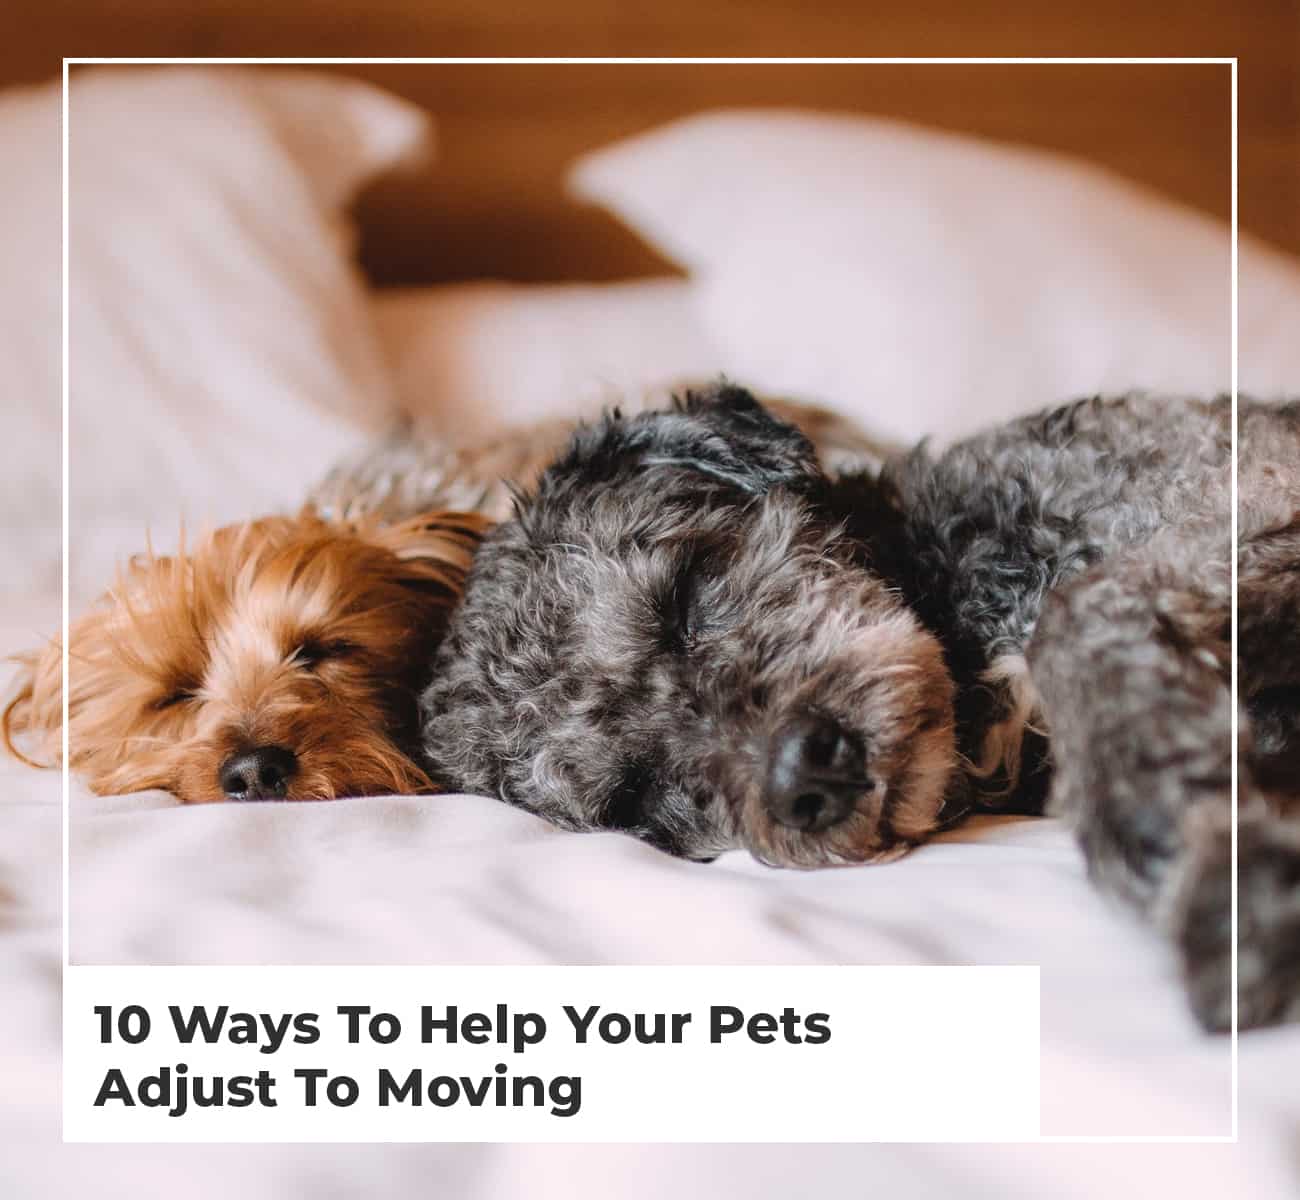 10 Ways To Help Your Pets Adjust To Moving